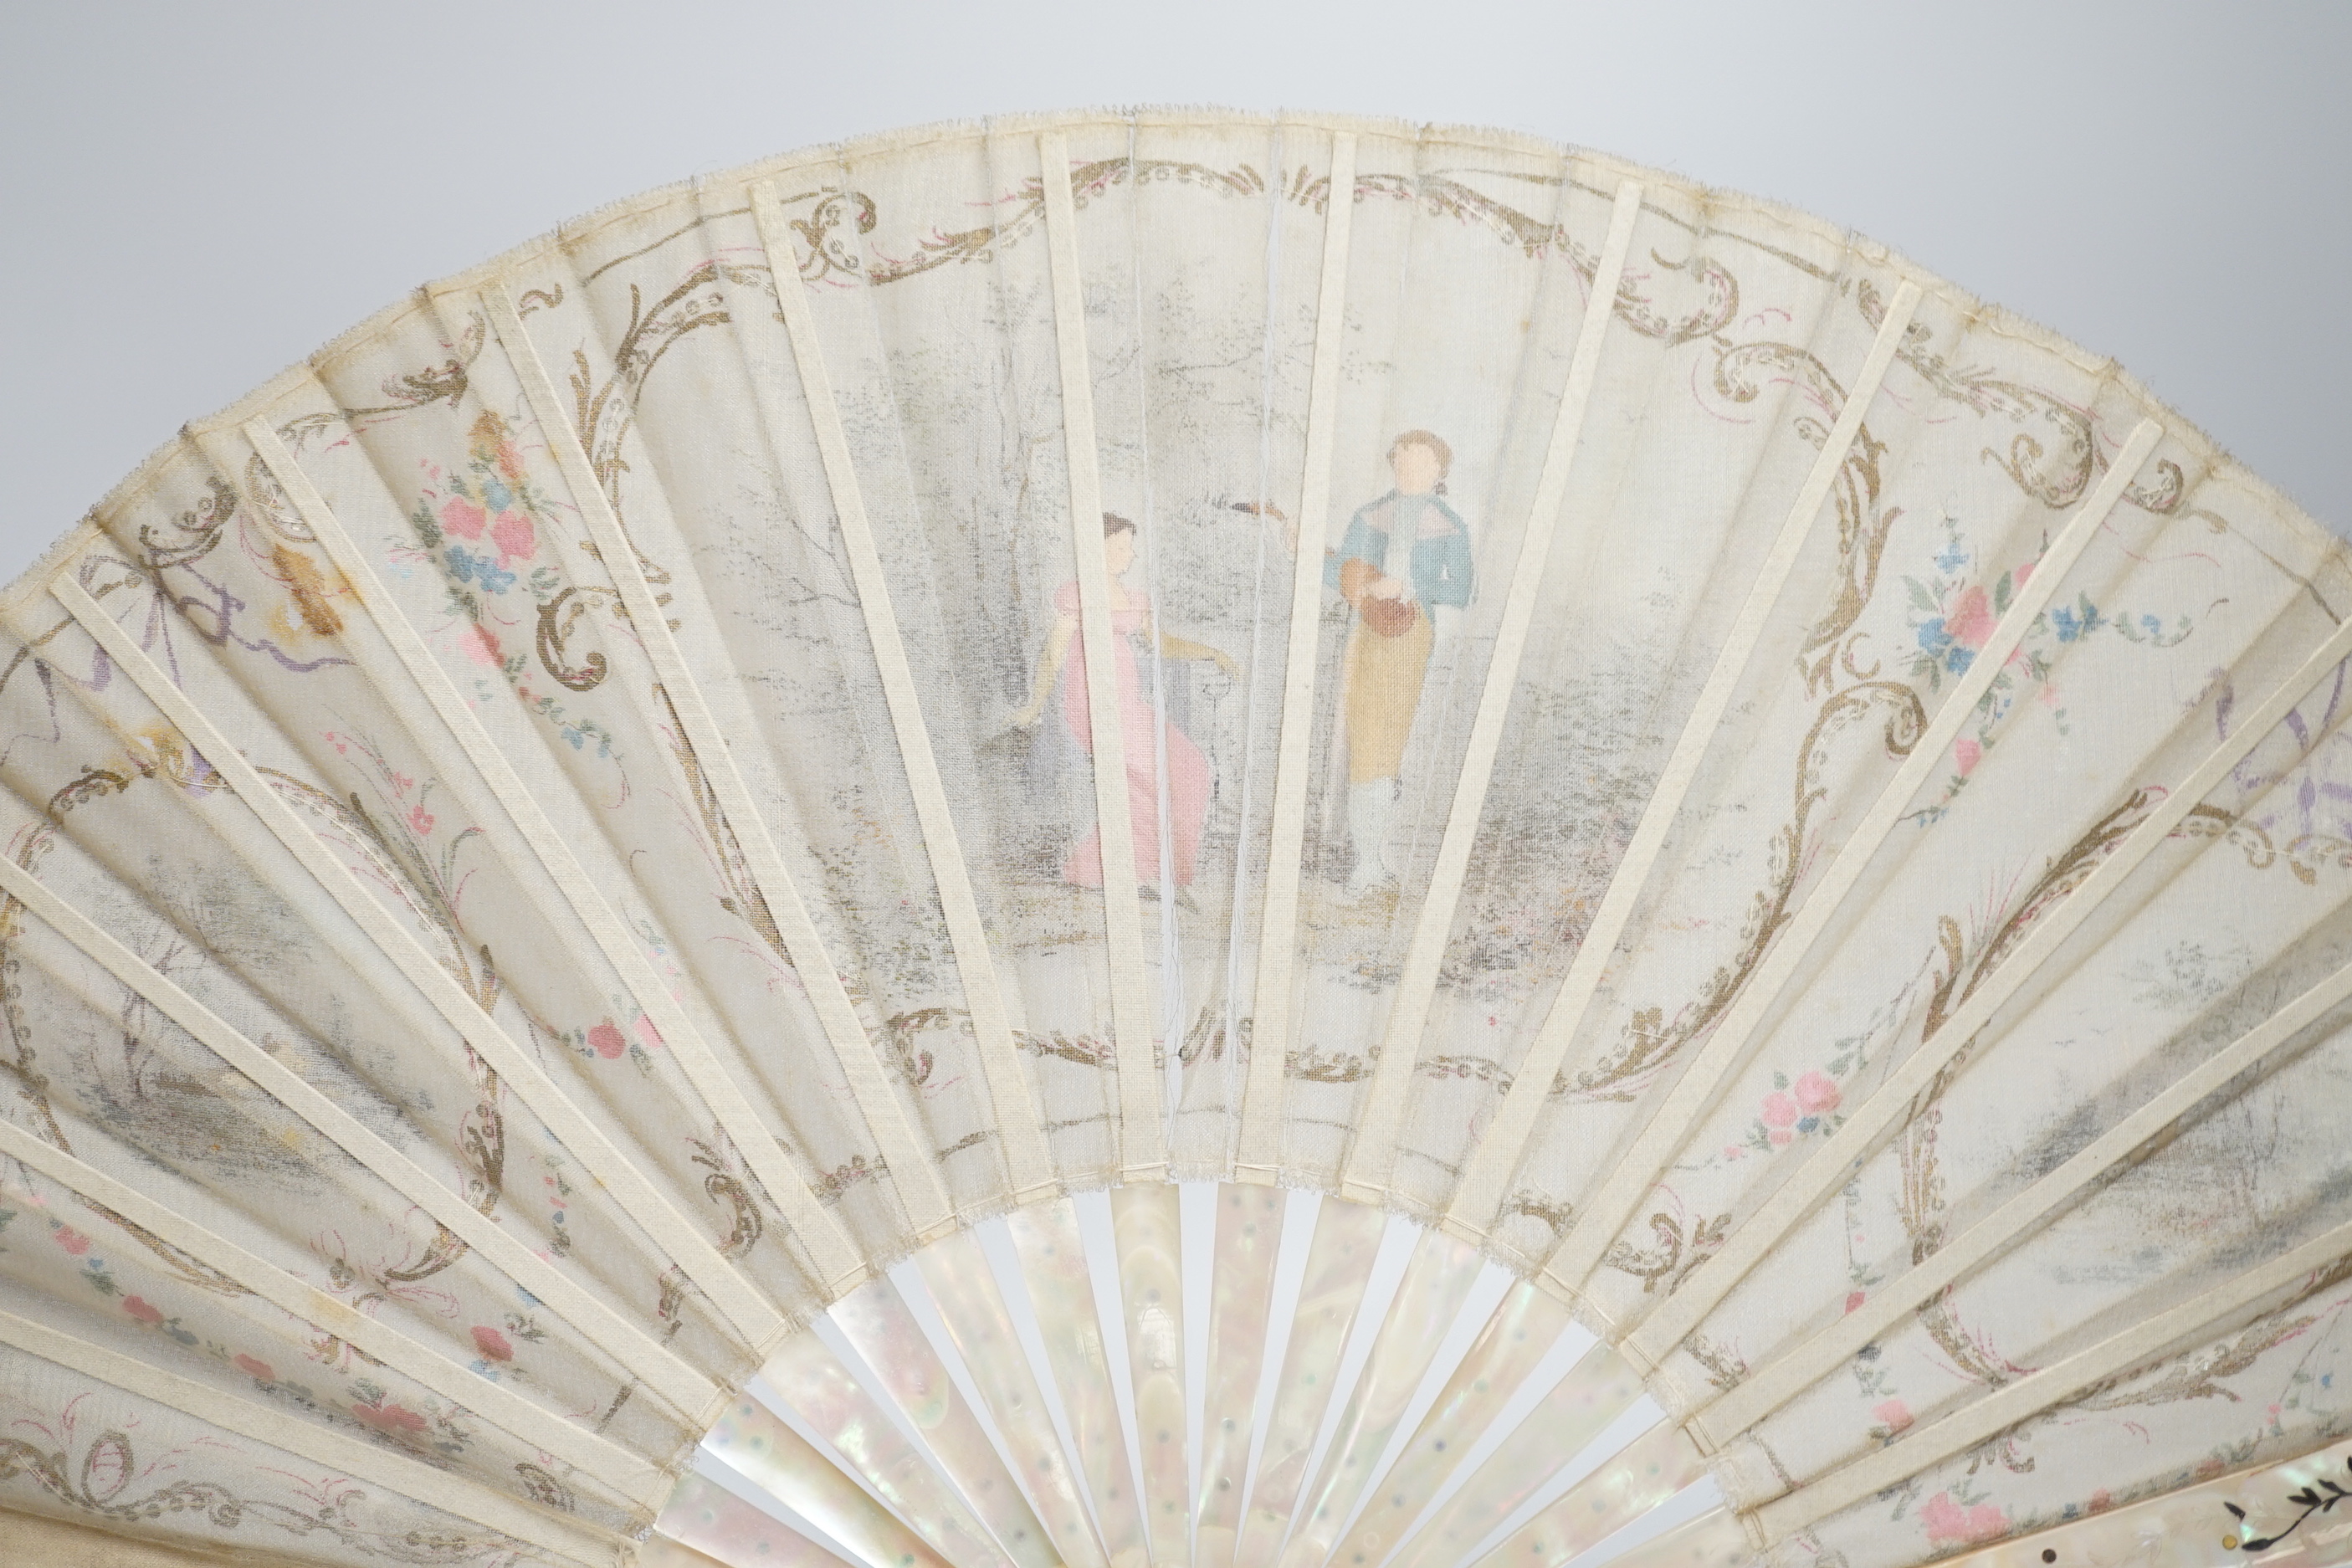 An Edwardian mother of pearl and fine gauze hand painted fan in satin and sequin case